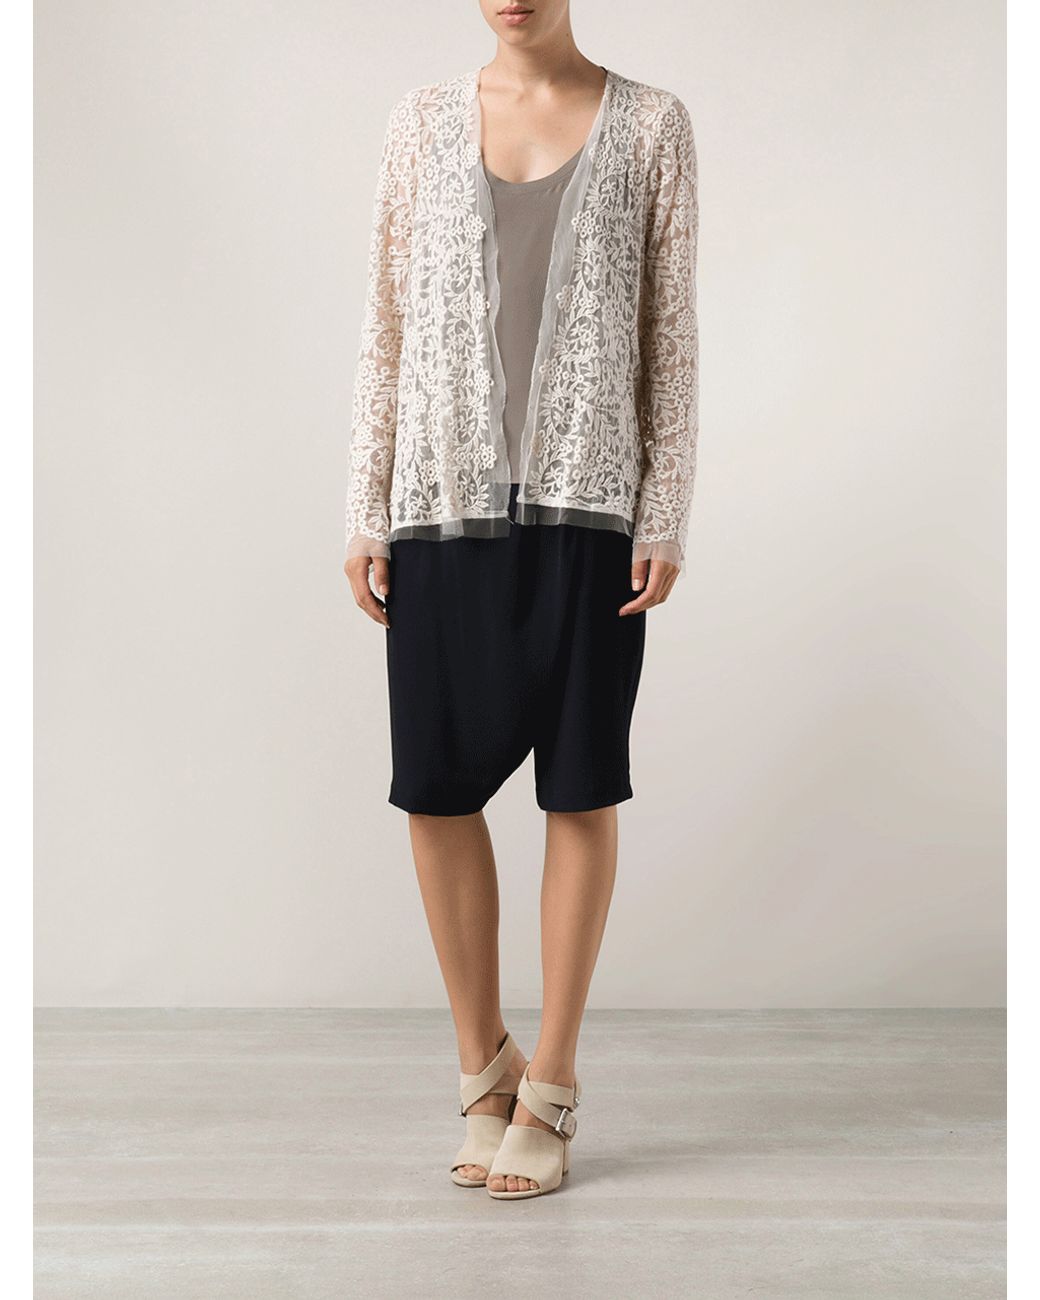 Nicole Miller Lace Cardigan in Ivory ...